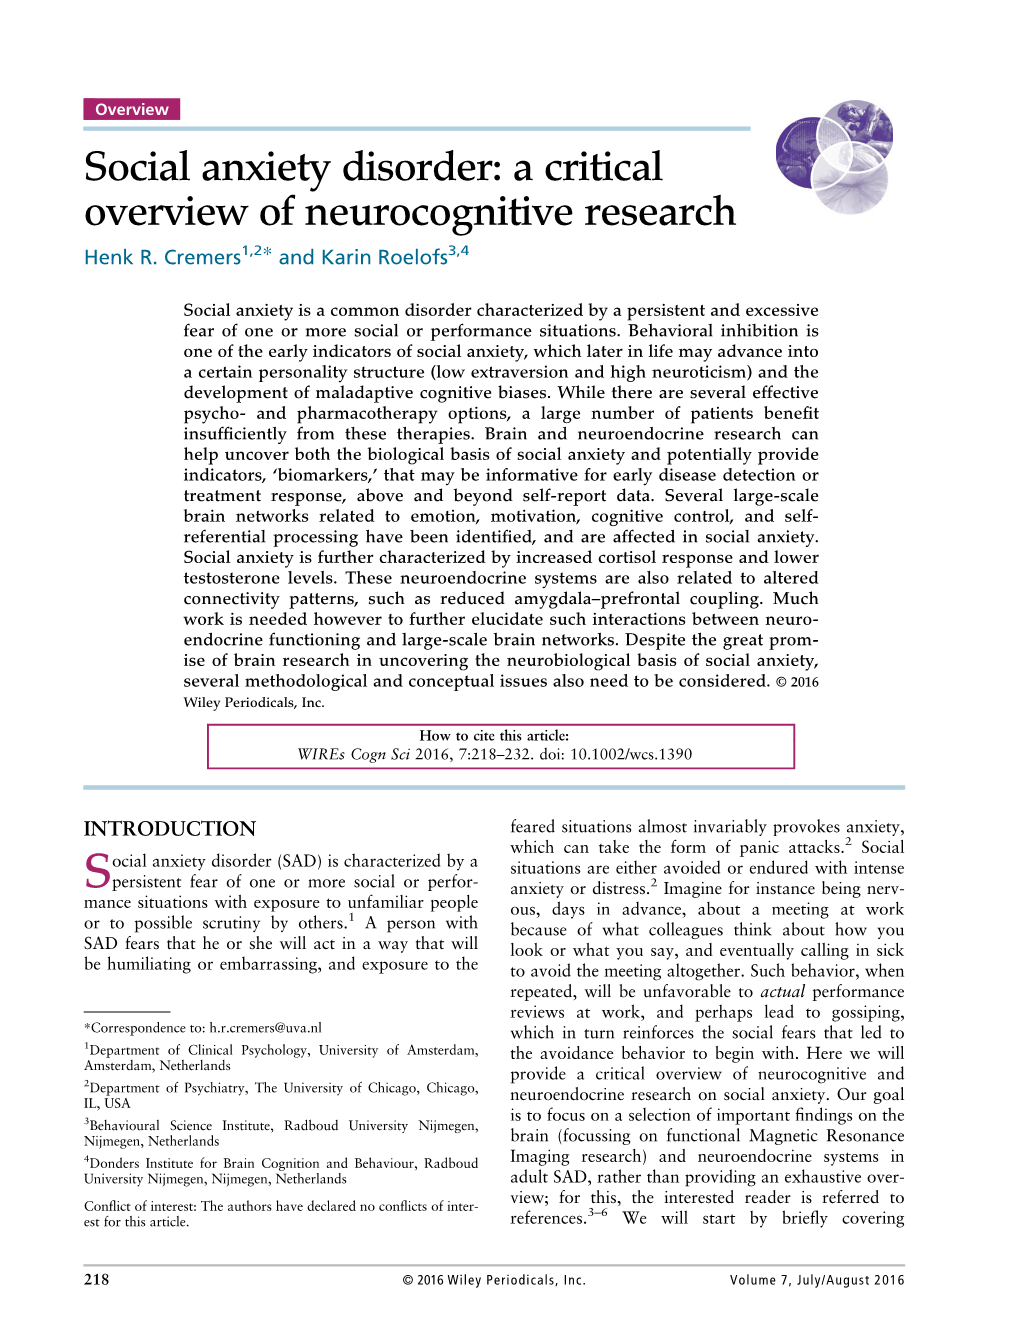 Social Anxiety Disorder: a Critical Overview of Neurocognitive Research Henk R